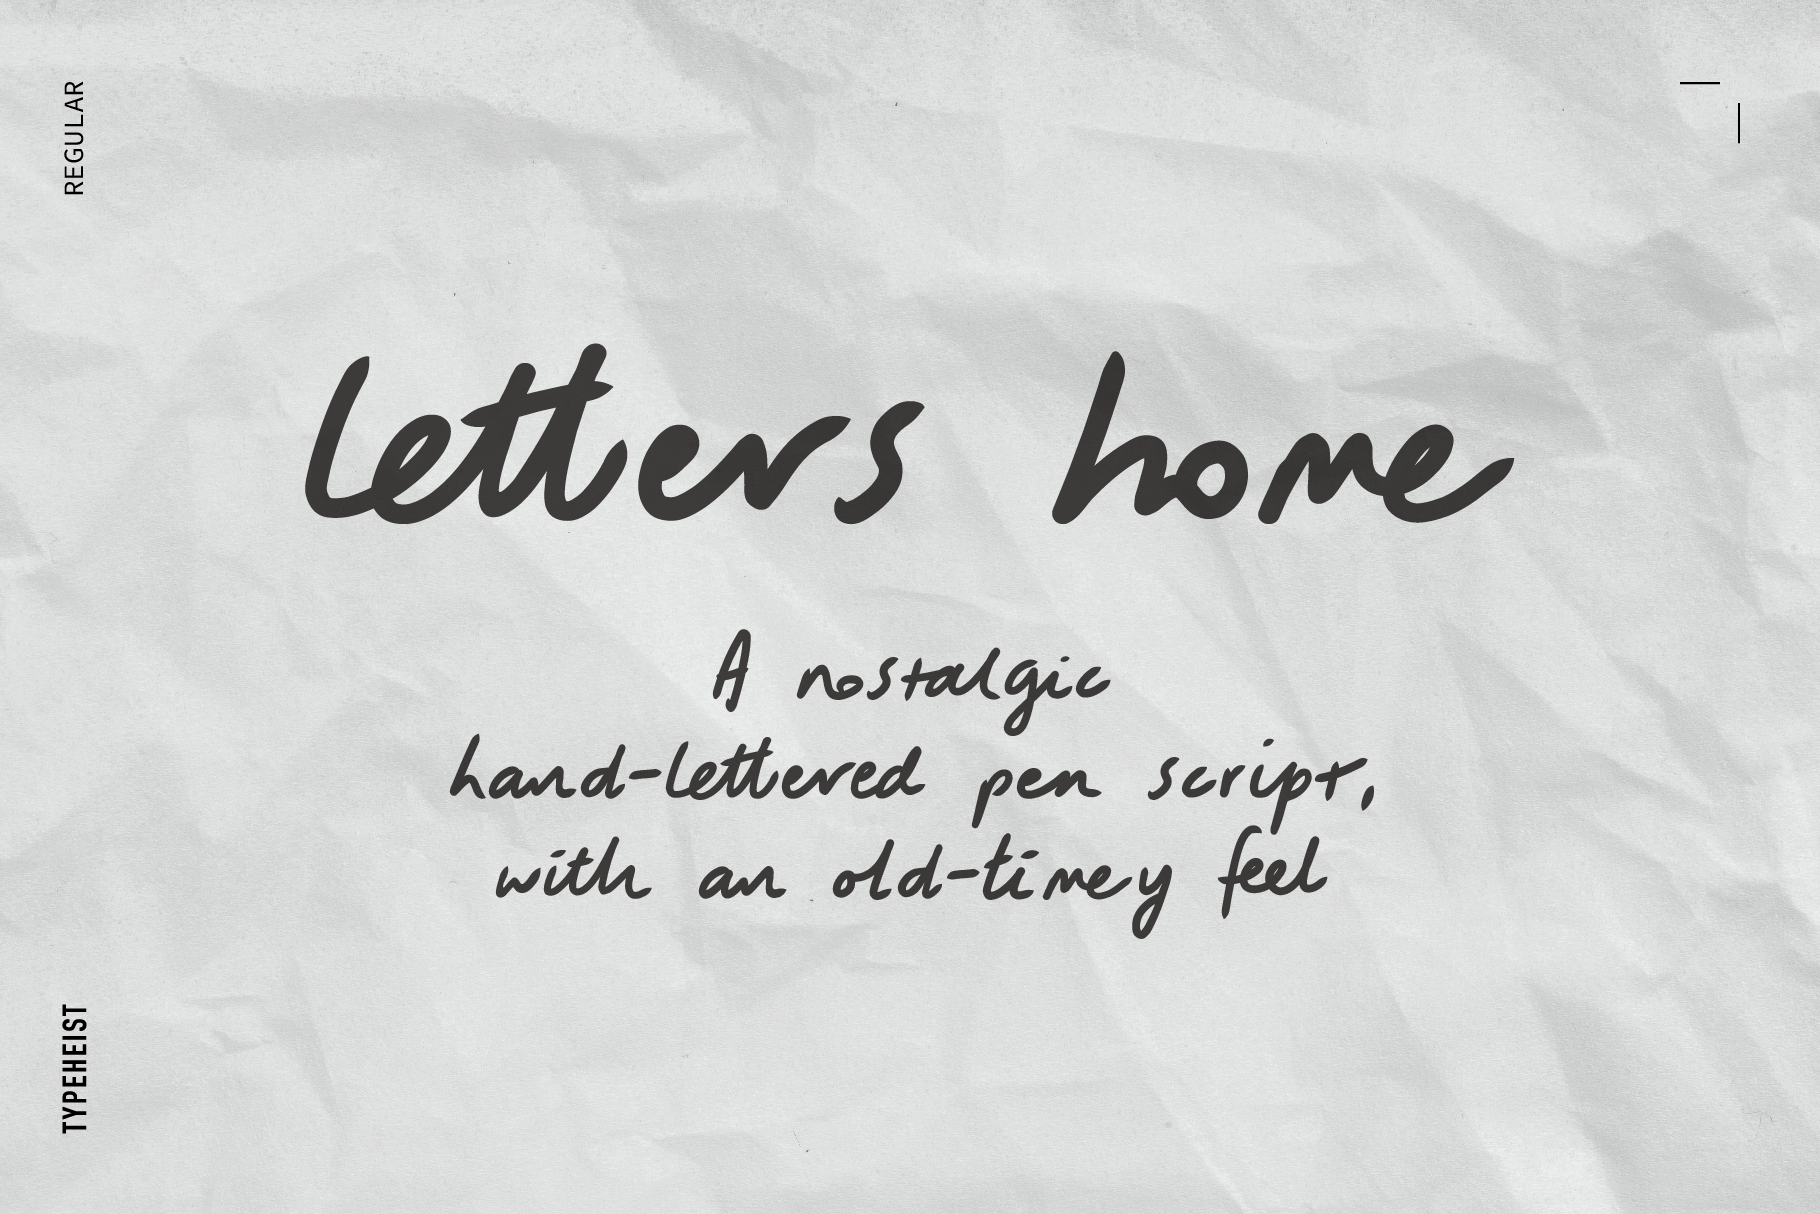 Letters Home: A nostalgic handwritten pen script with an old-timey feel